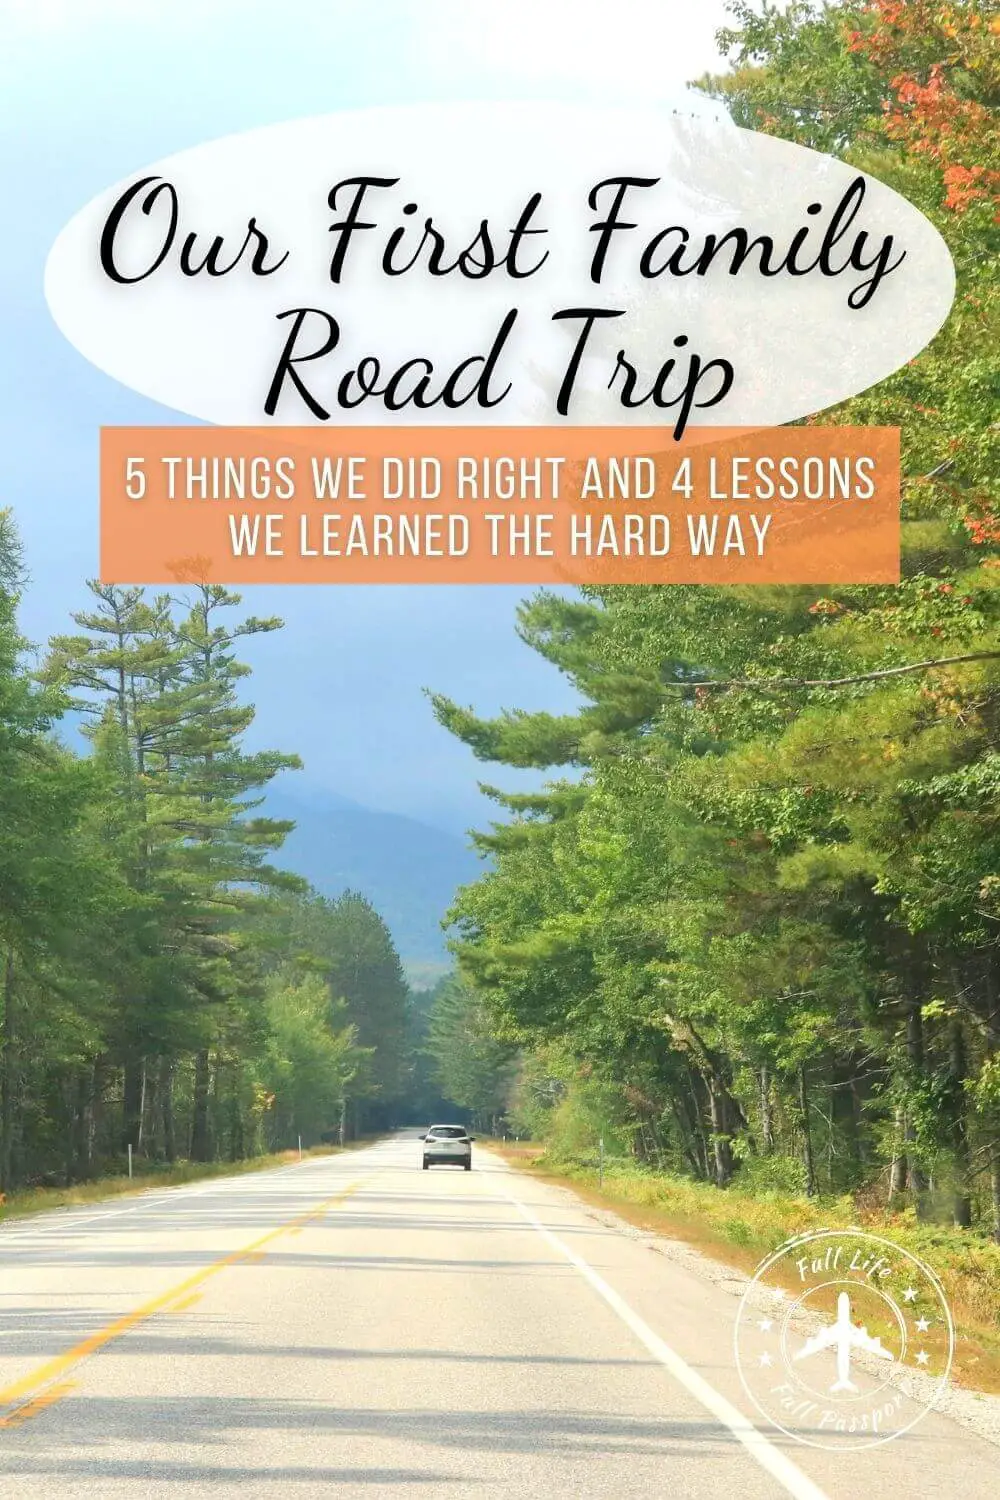 Our First Family Road Trip: 5 Things We Did Right and 4 Lessons We Learned the Hard Way